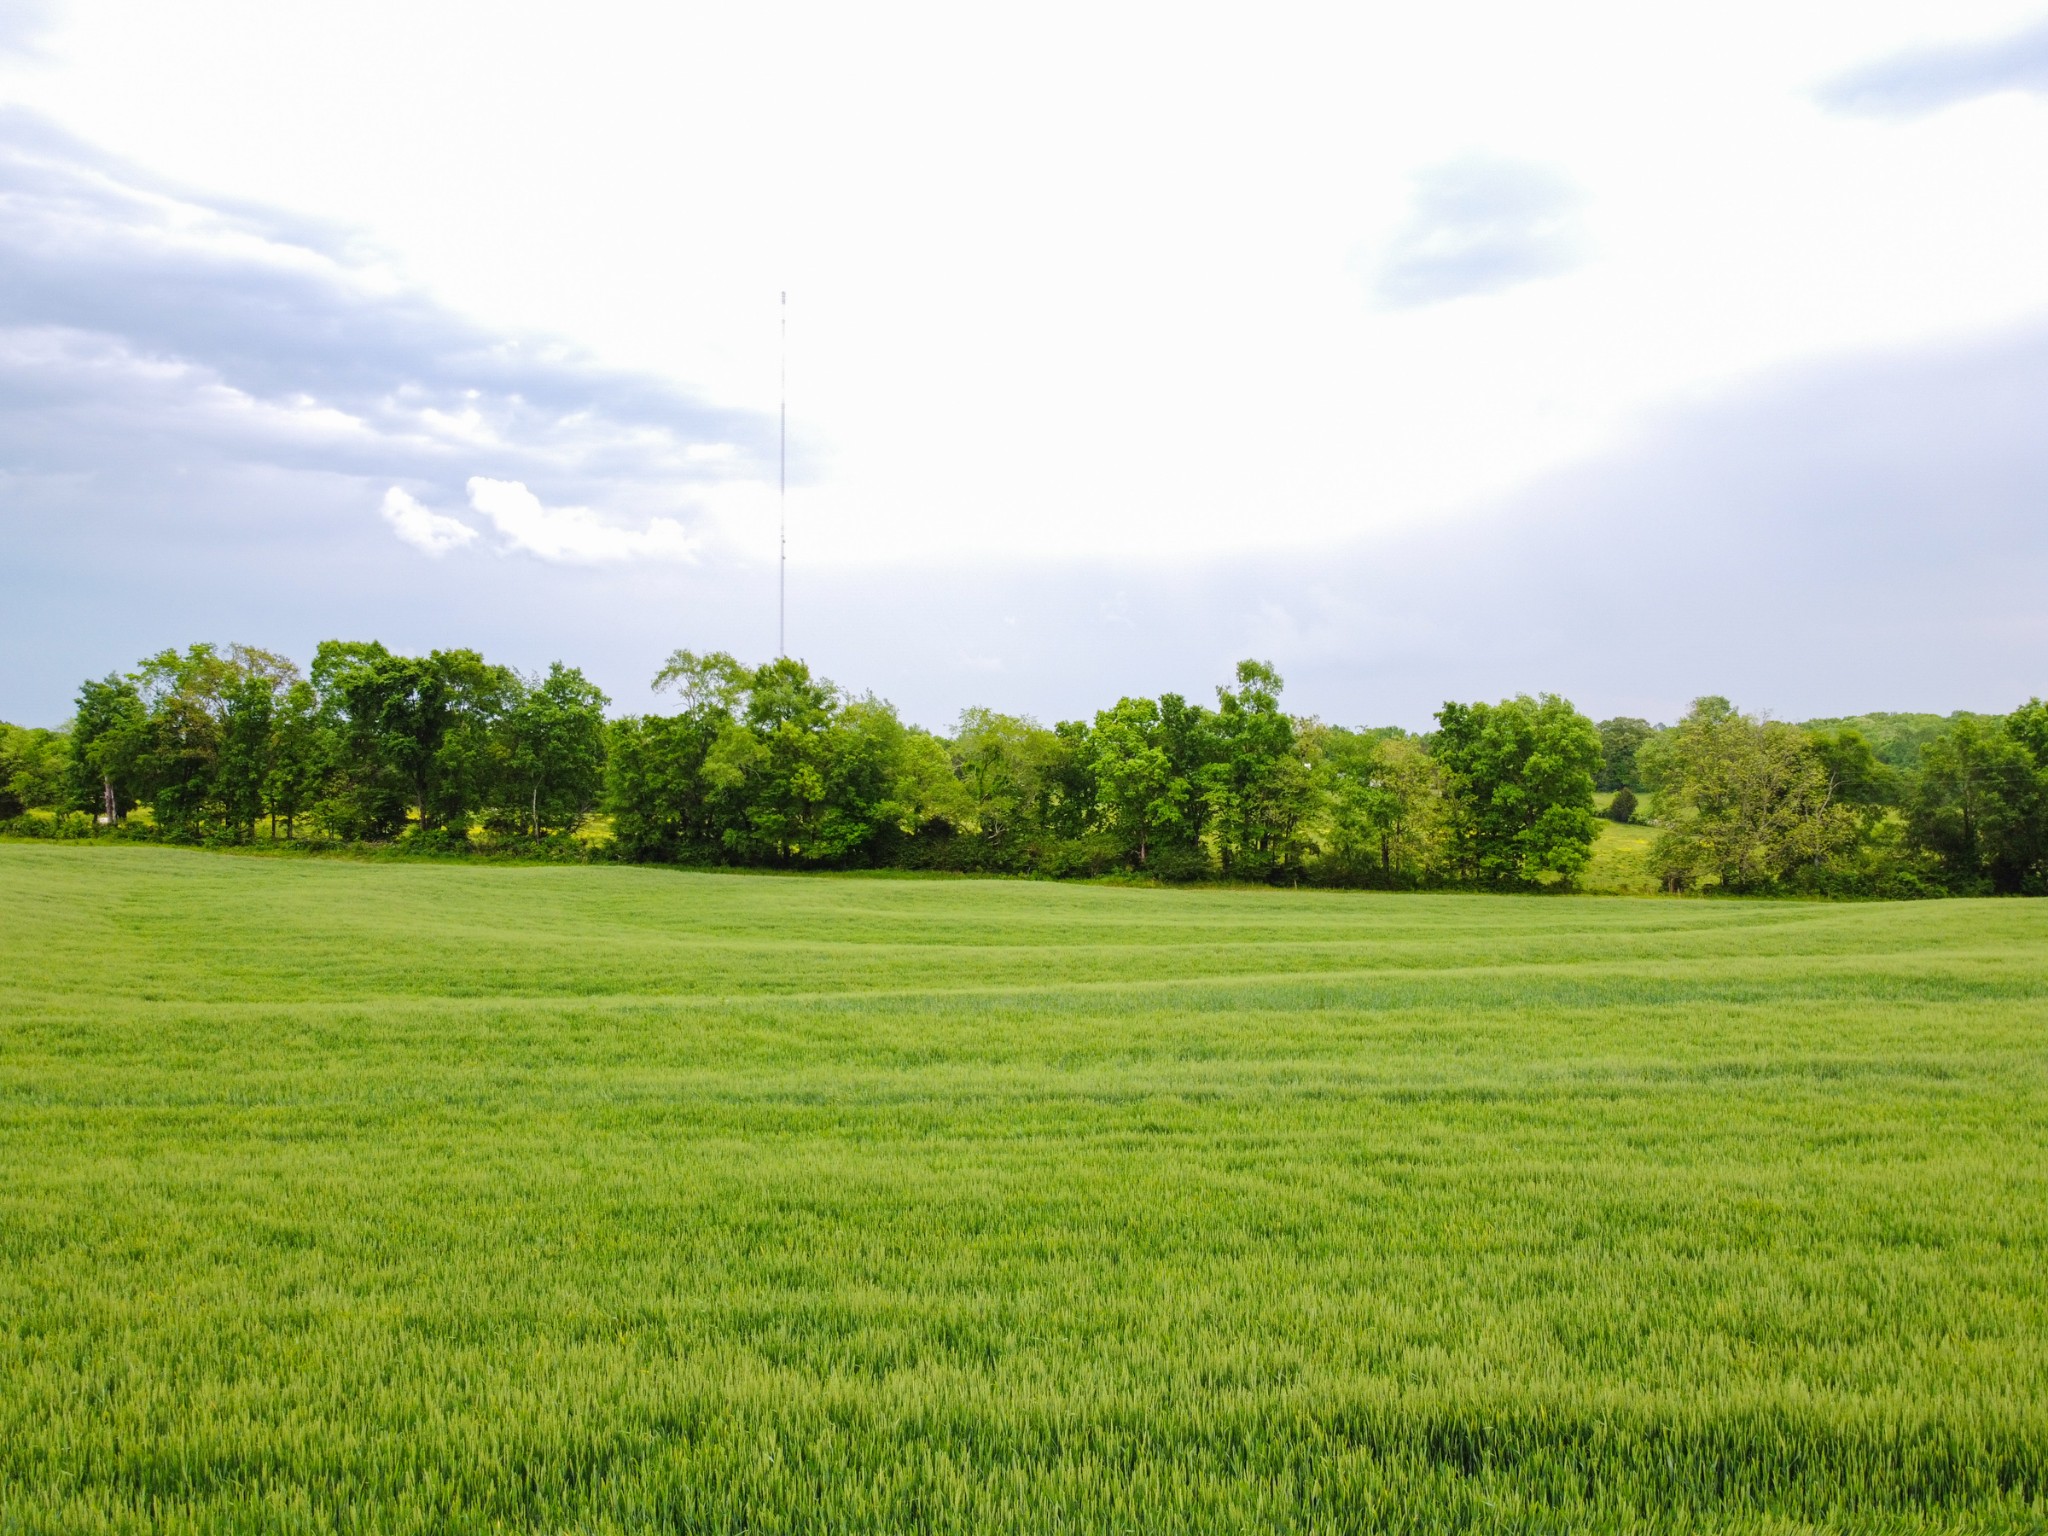 a view of a field with an trees